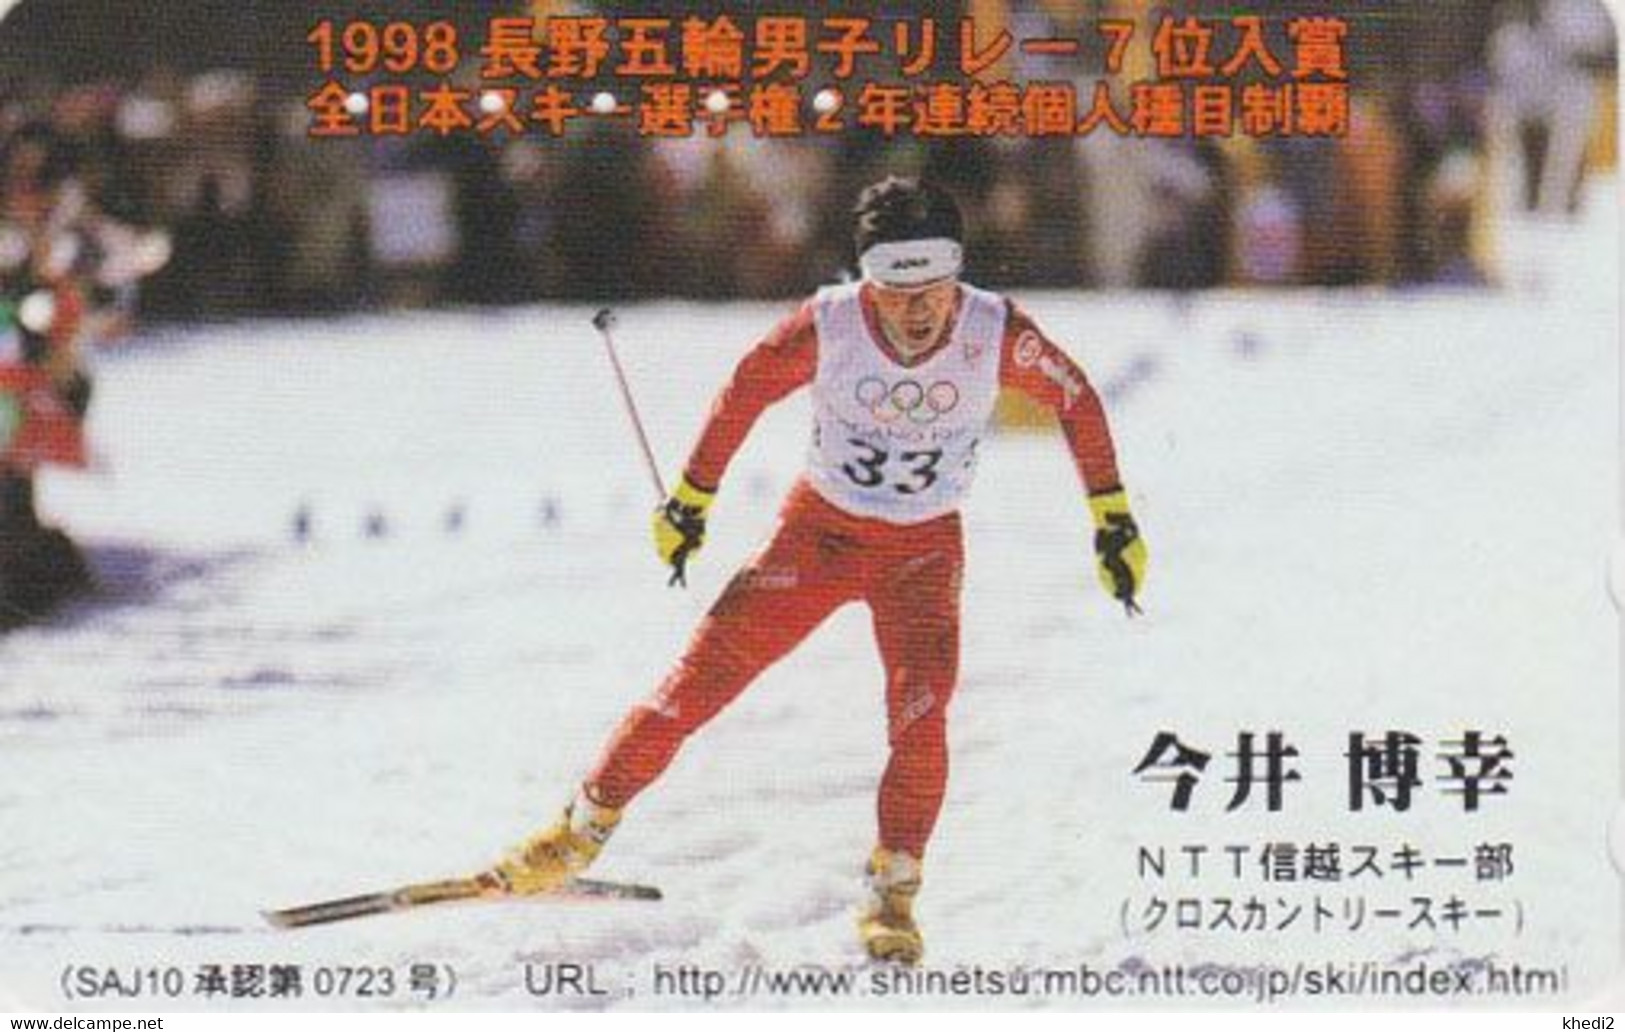 TC JAPON / 110-203839 - SPORT SKI / Jeux Olympiques JO NAGANO - Cross Country Olympic Games - JAPAN Free Phonecard  - 23 - Olympische Spiele